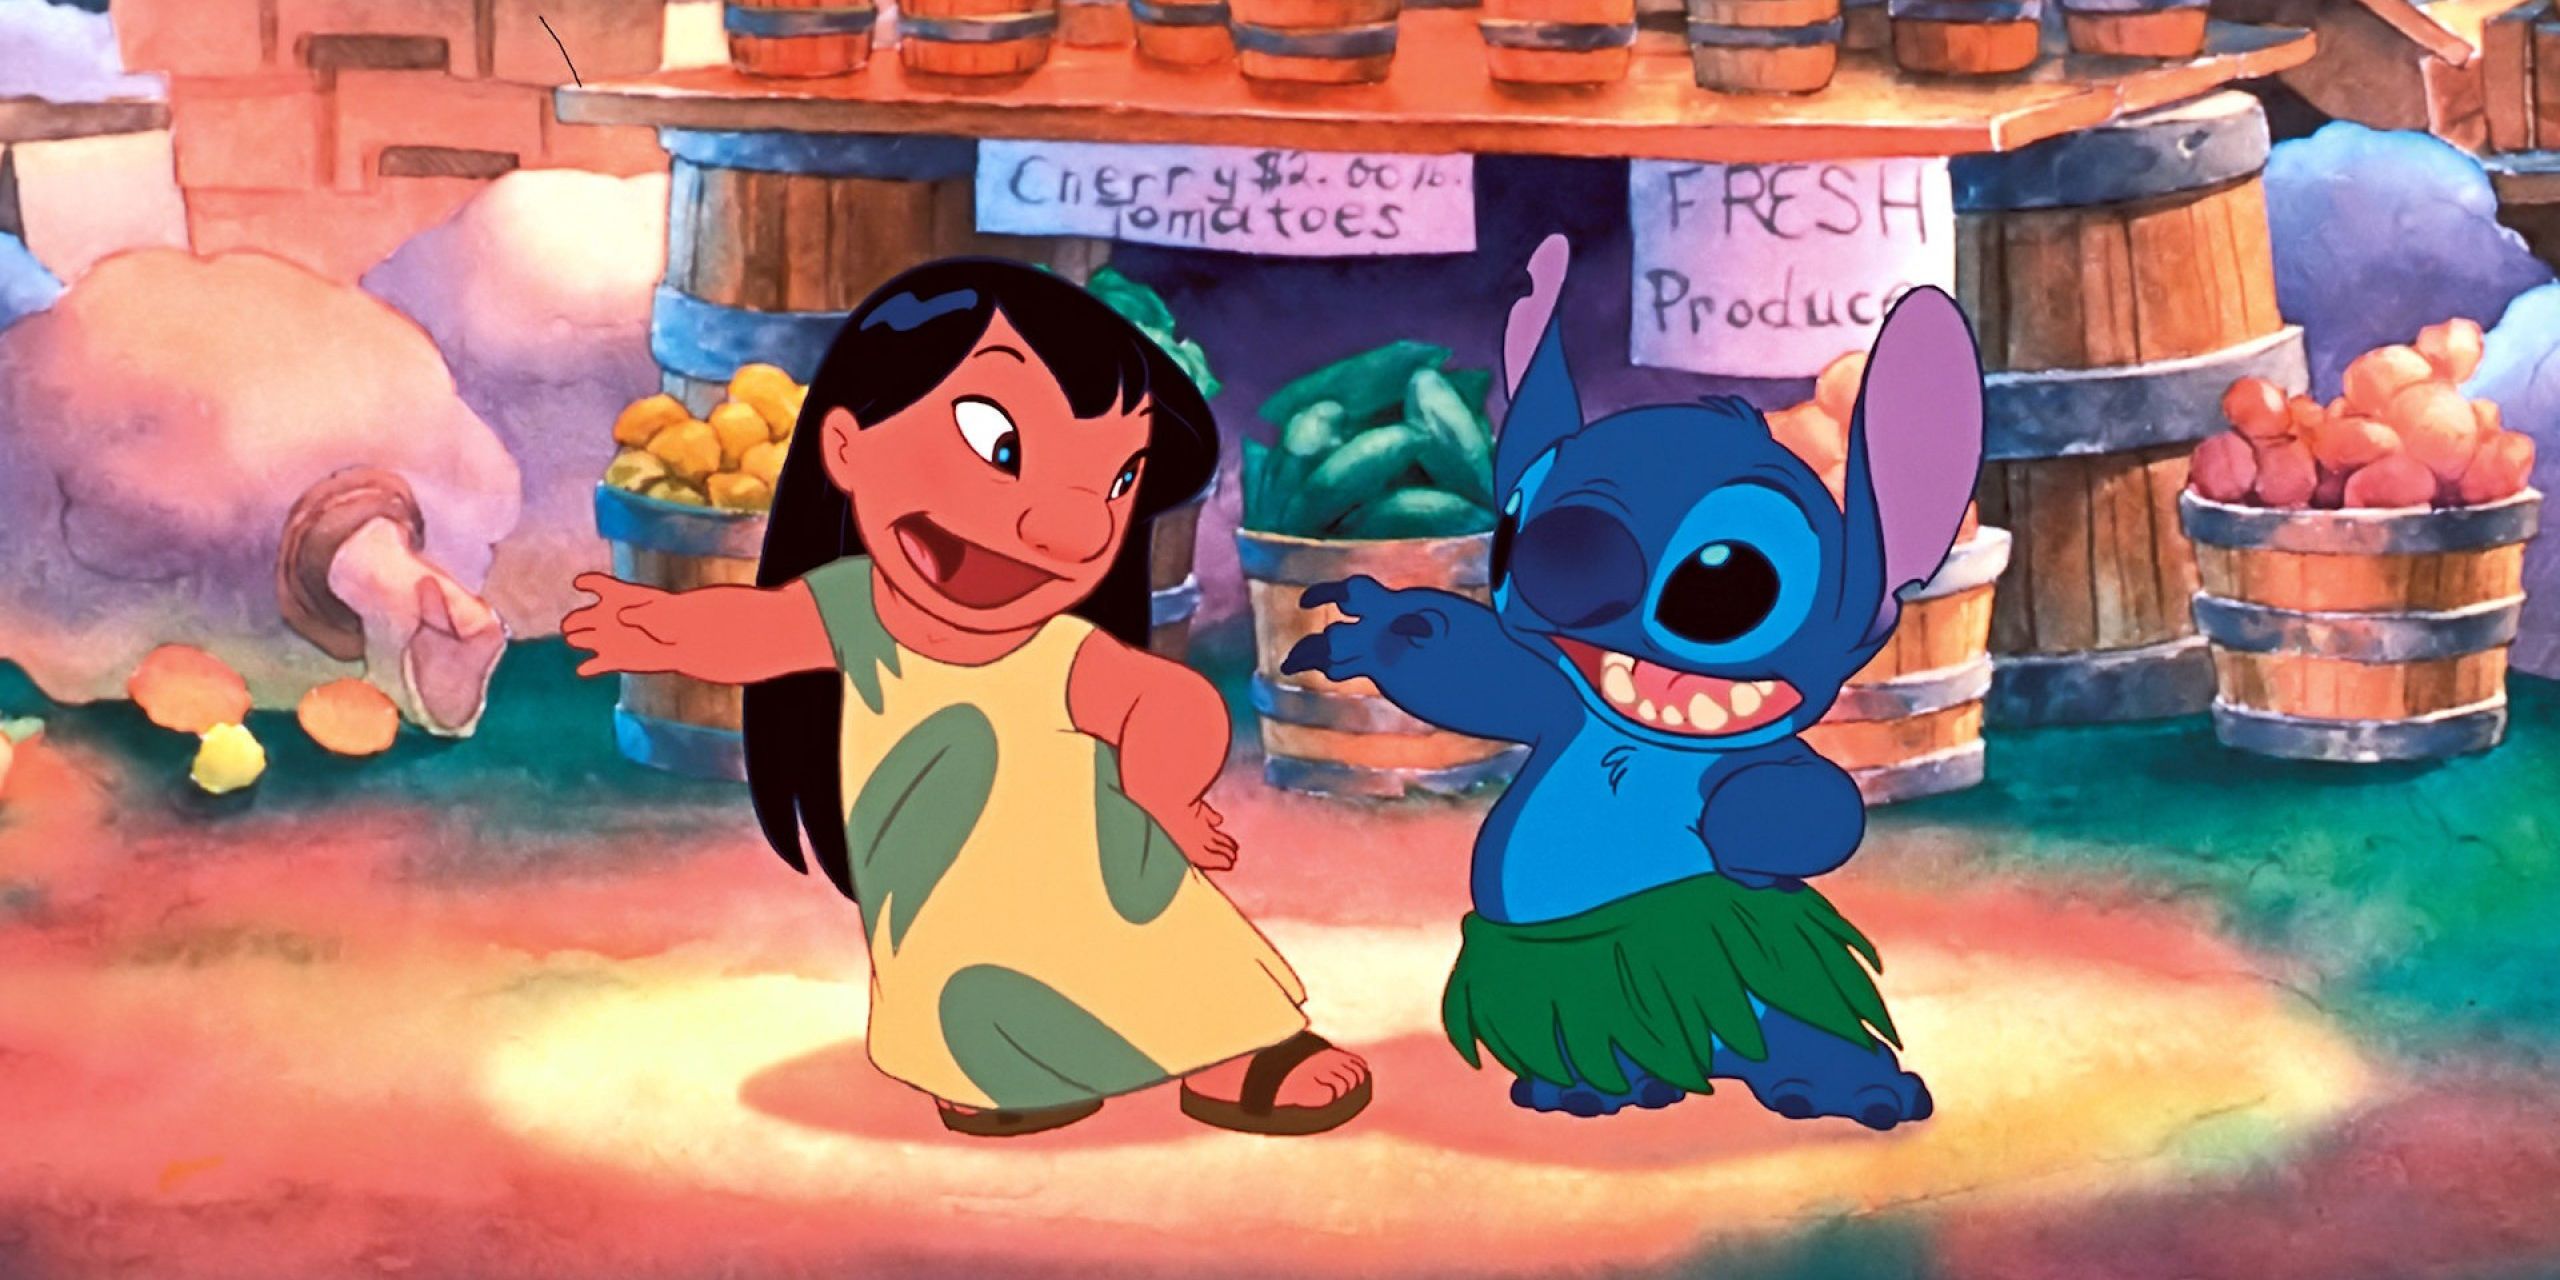 Lilo And Stitch dancing in the Disney animated movie